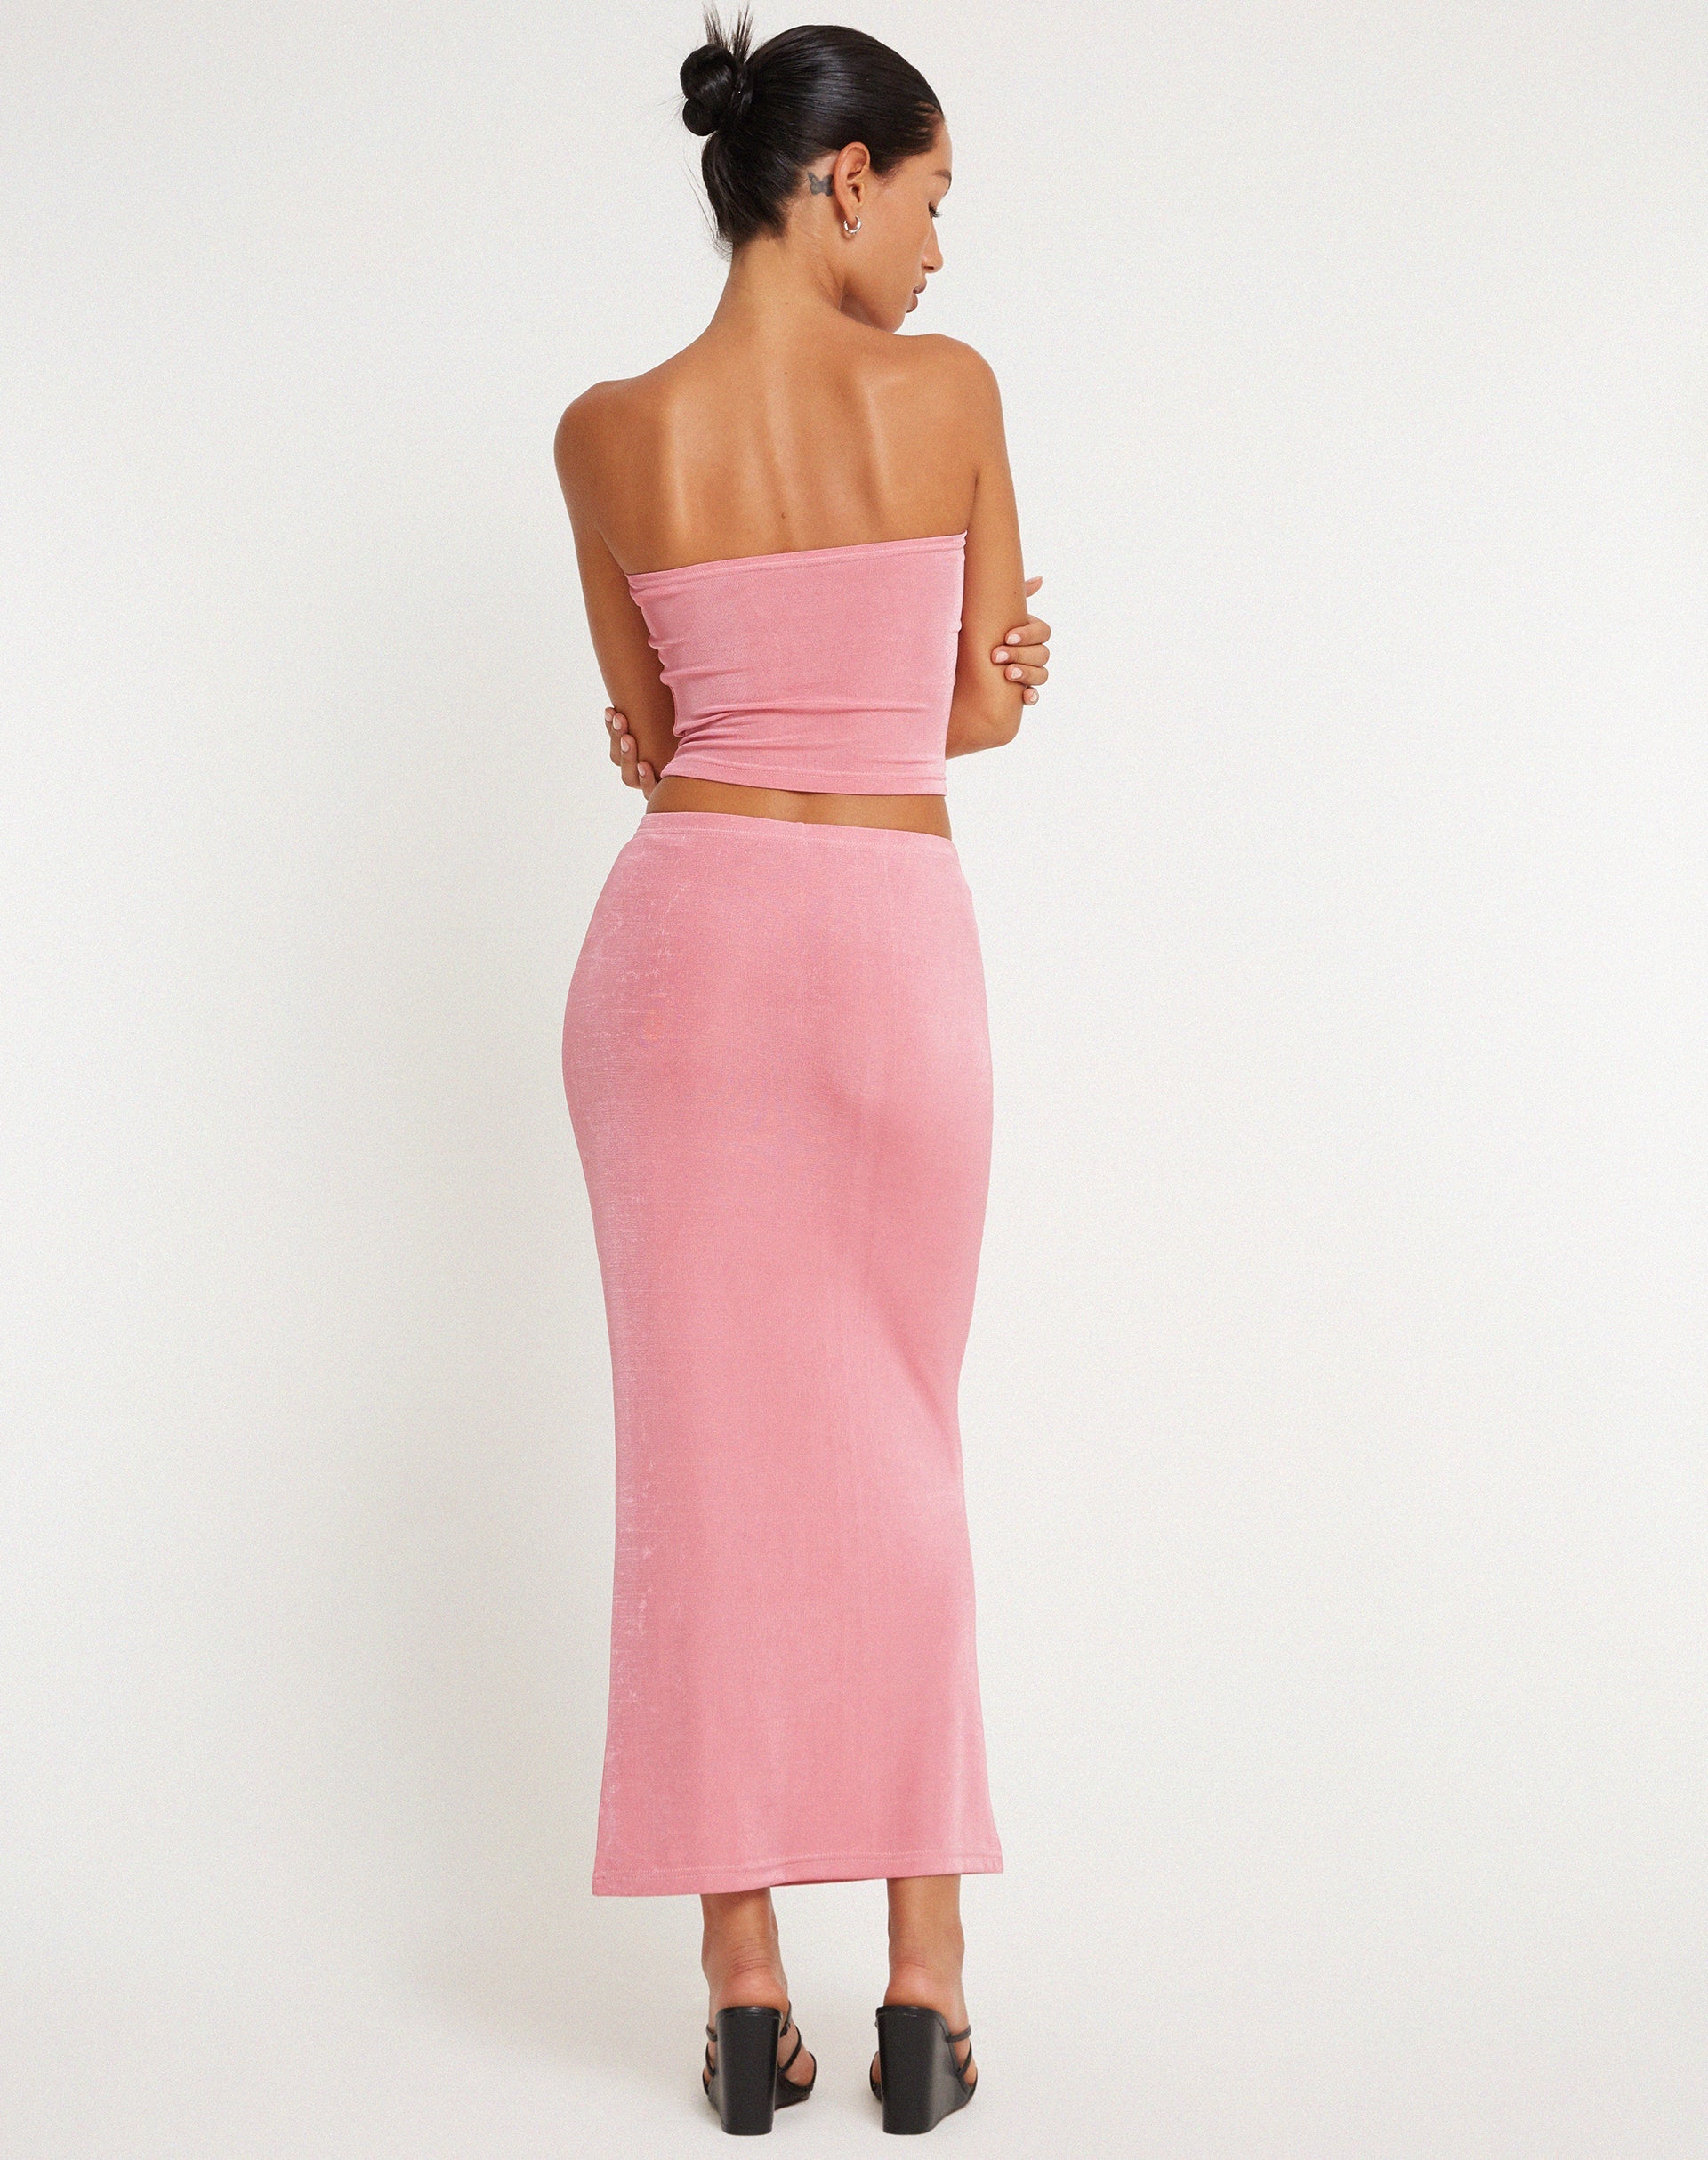 Image of Tulus Maxi Skirt in Pink